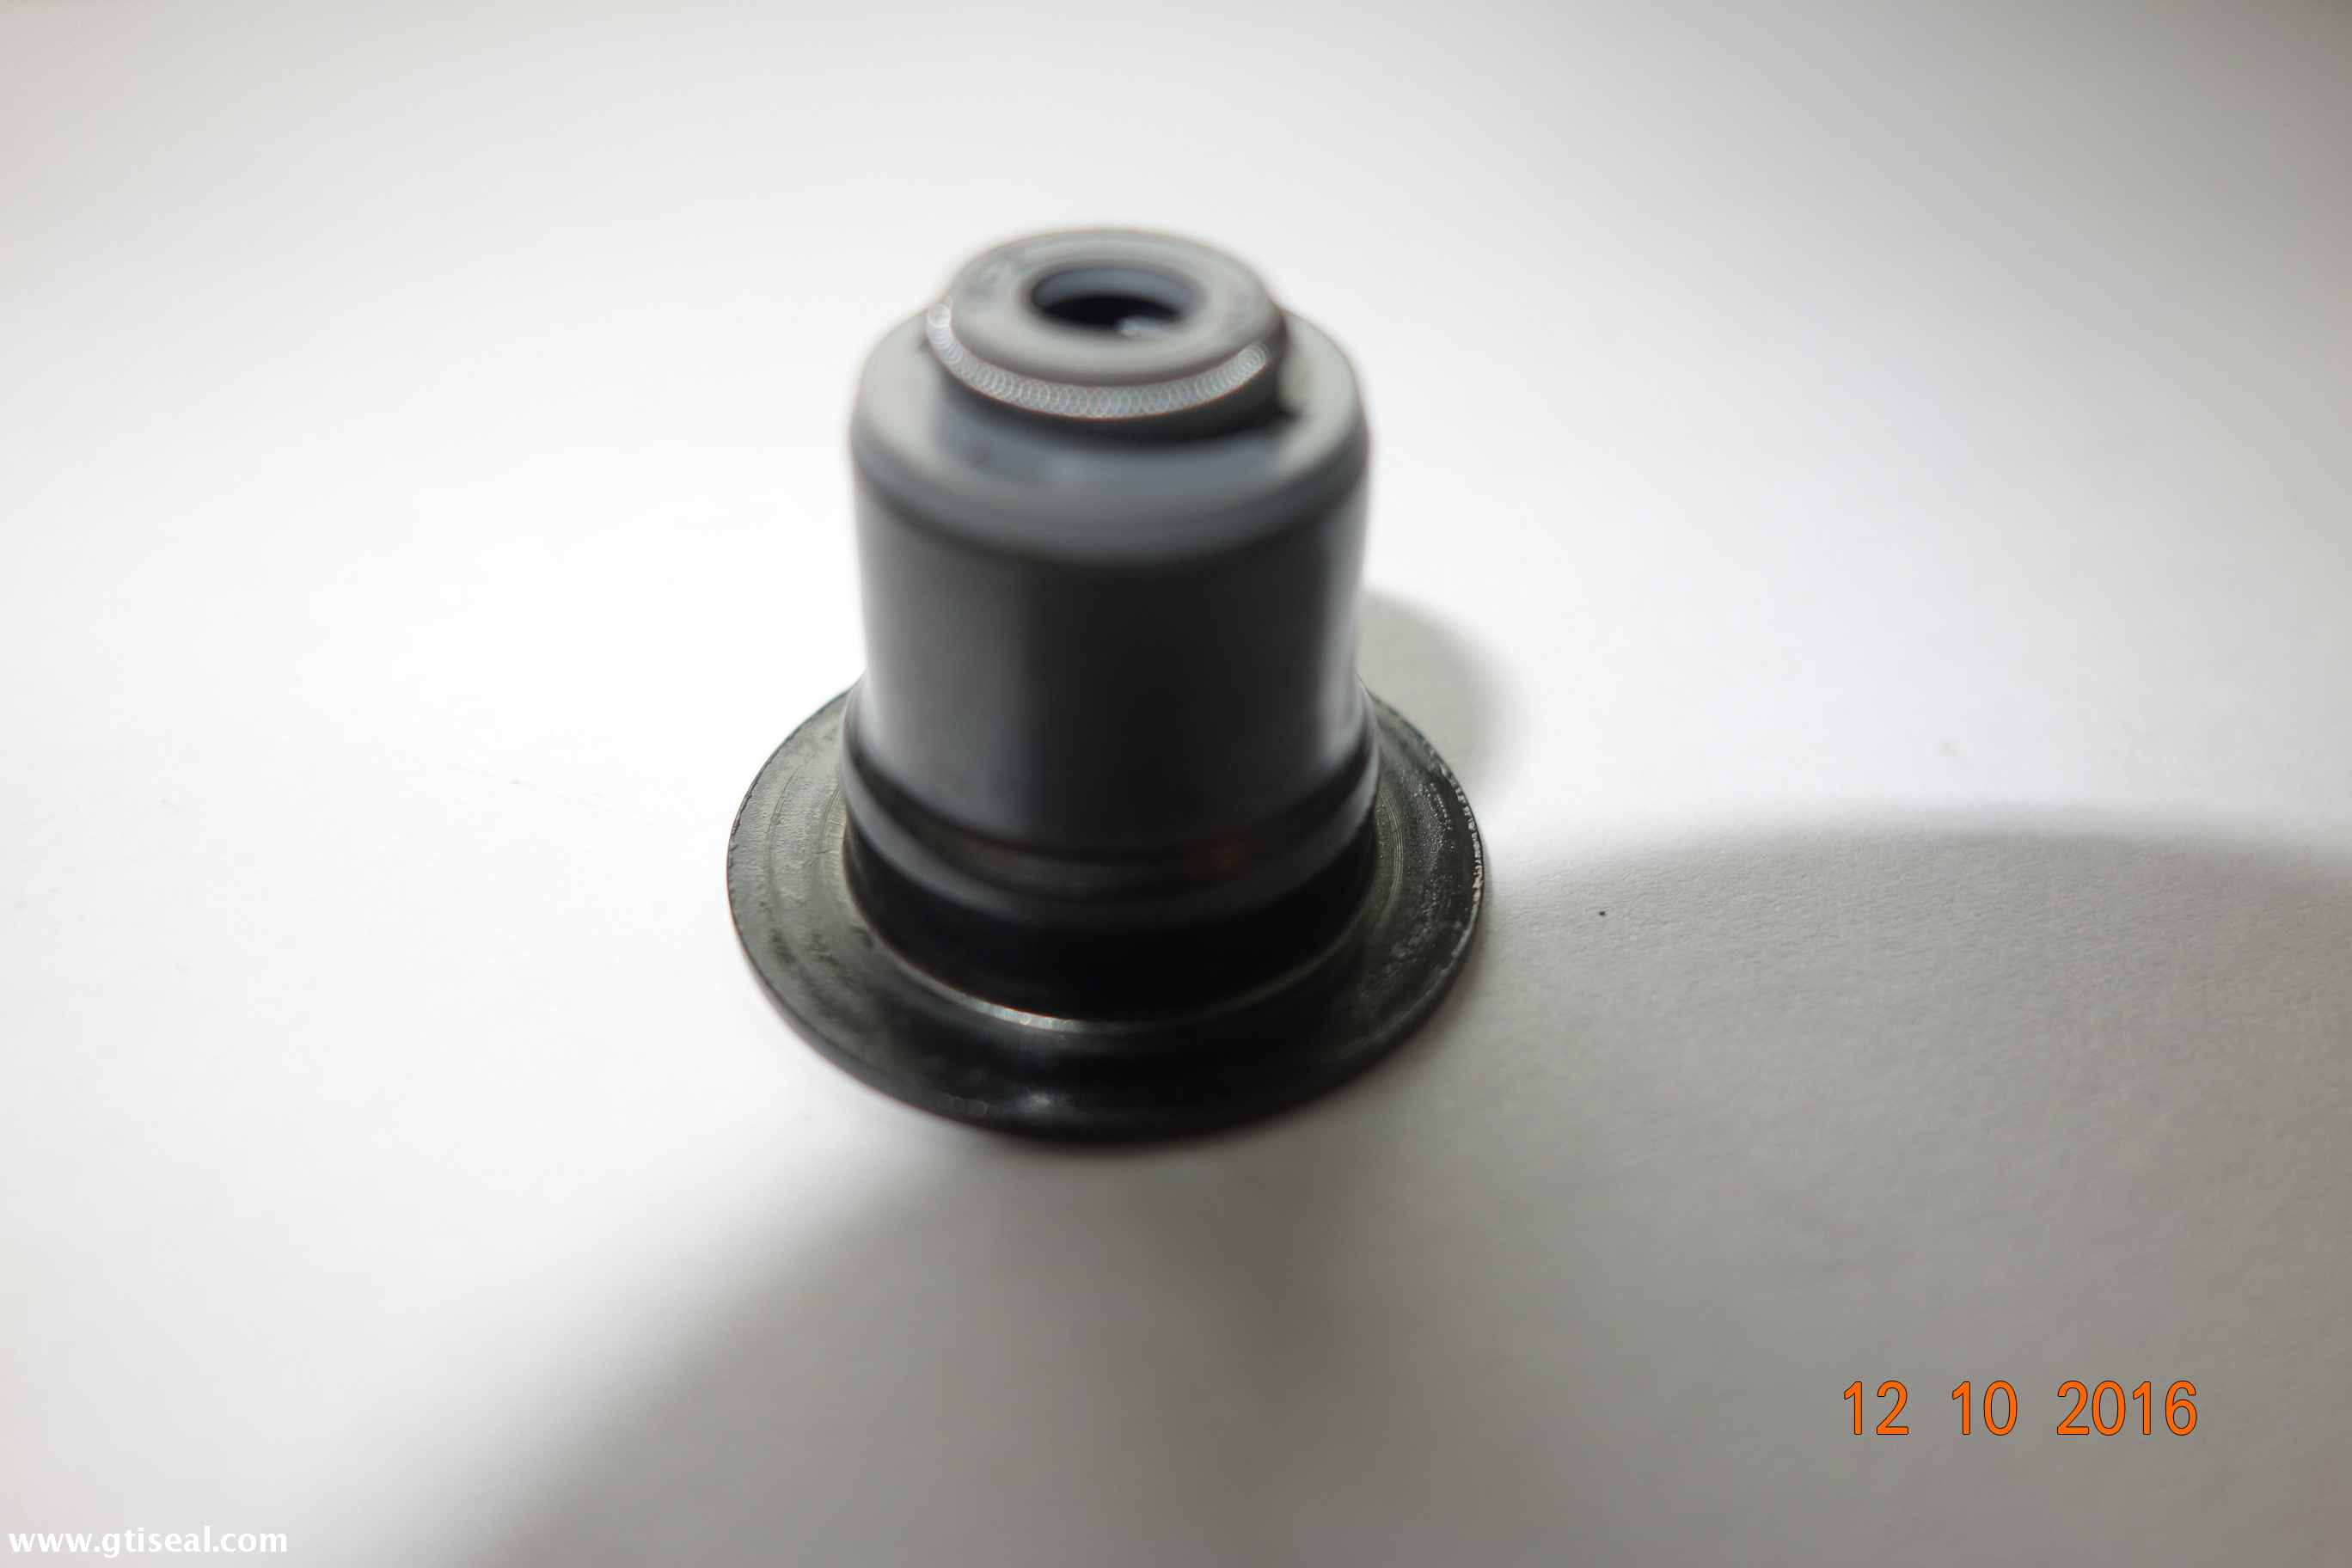 NBR Valve Stem Seal for Engine Factory in Store